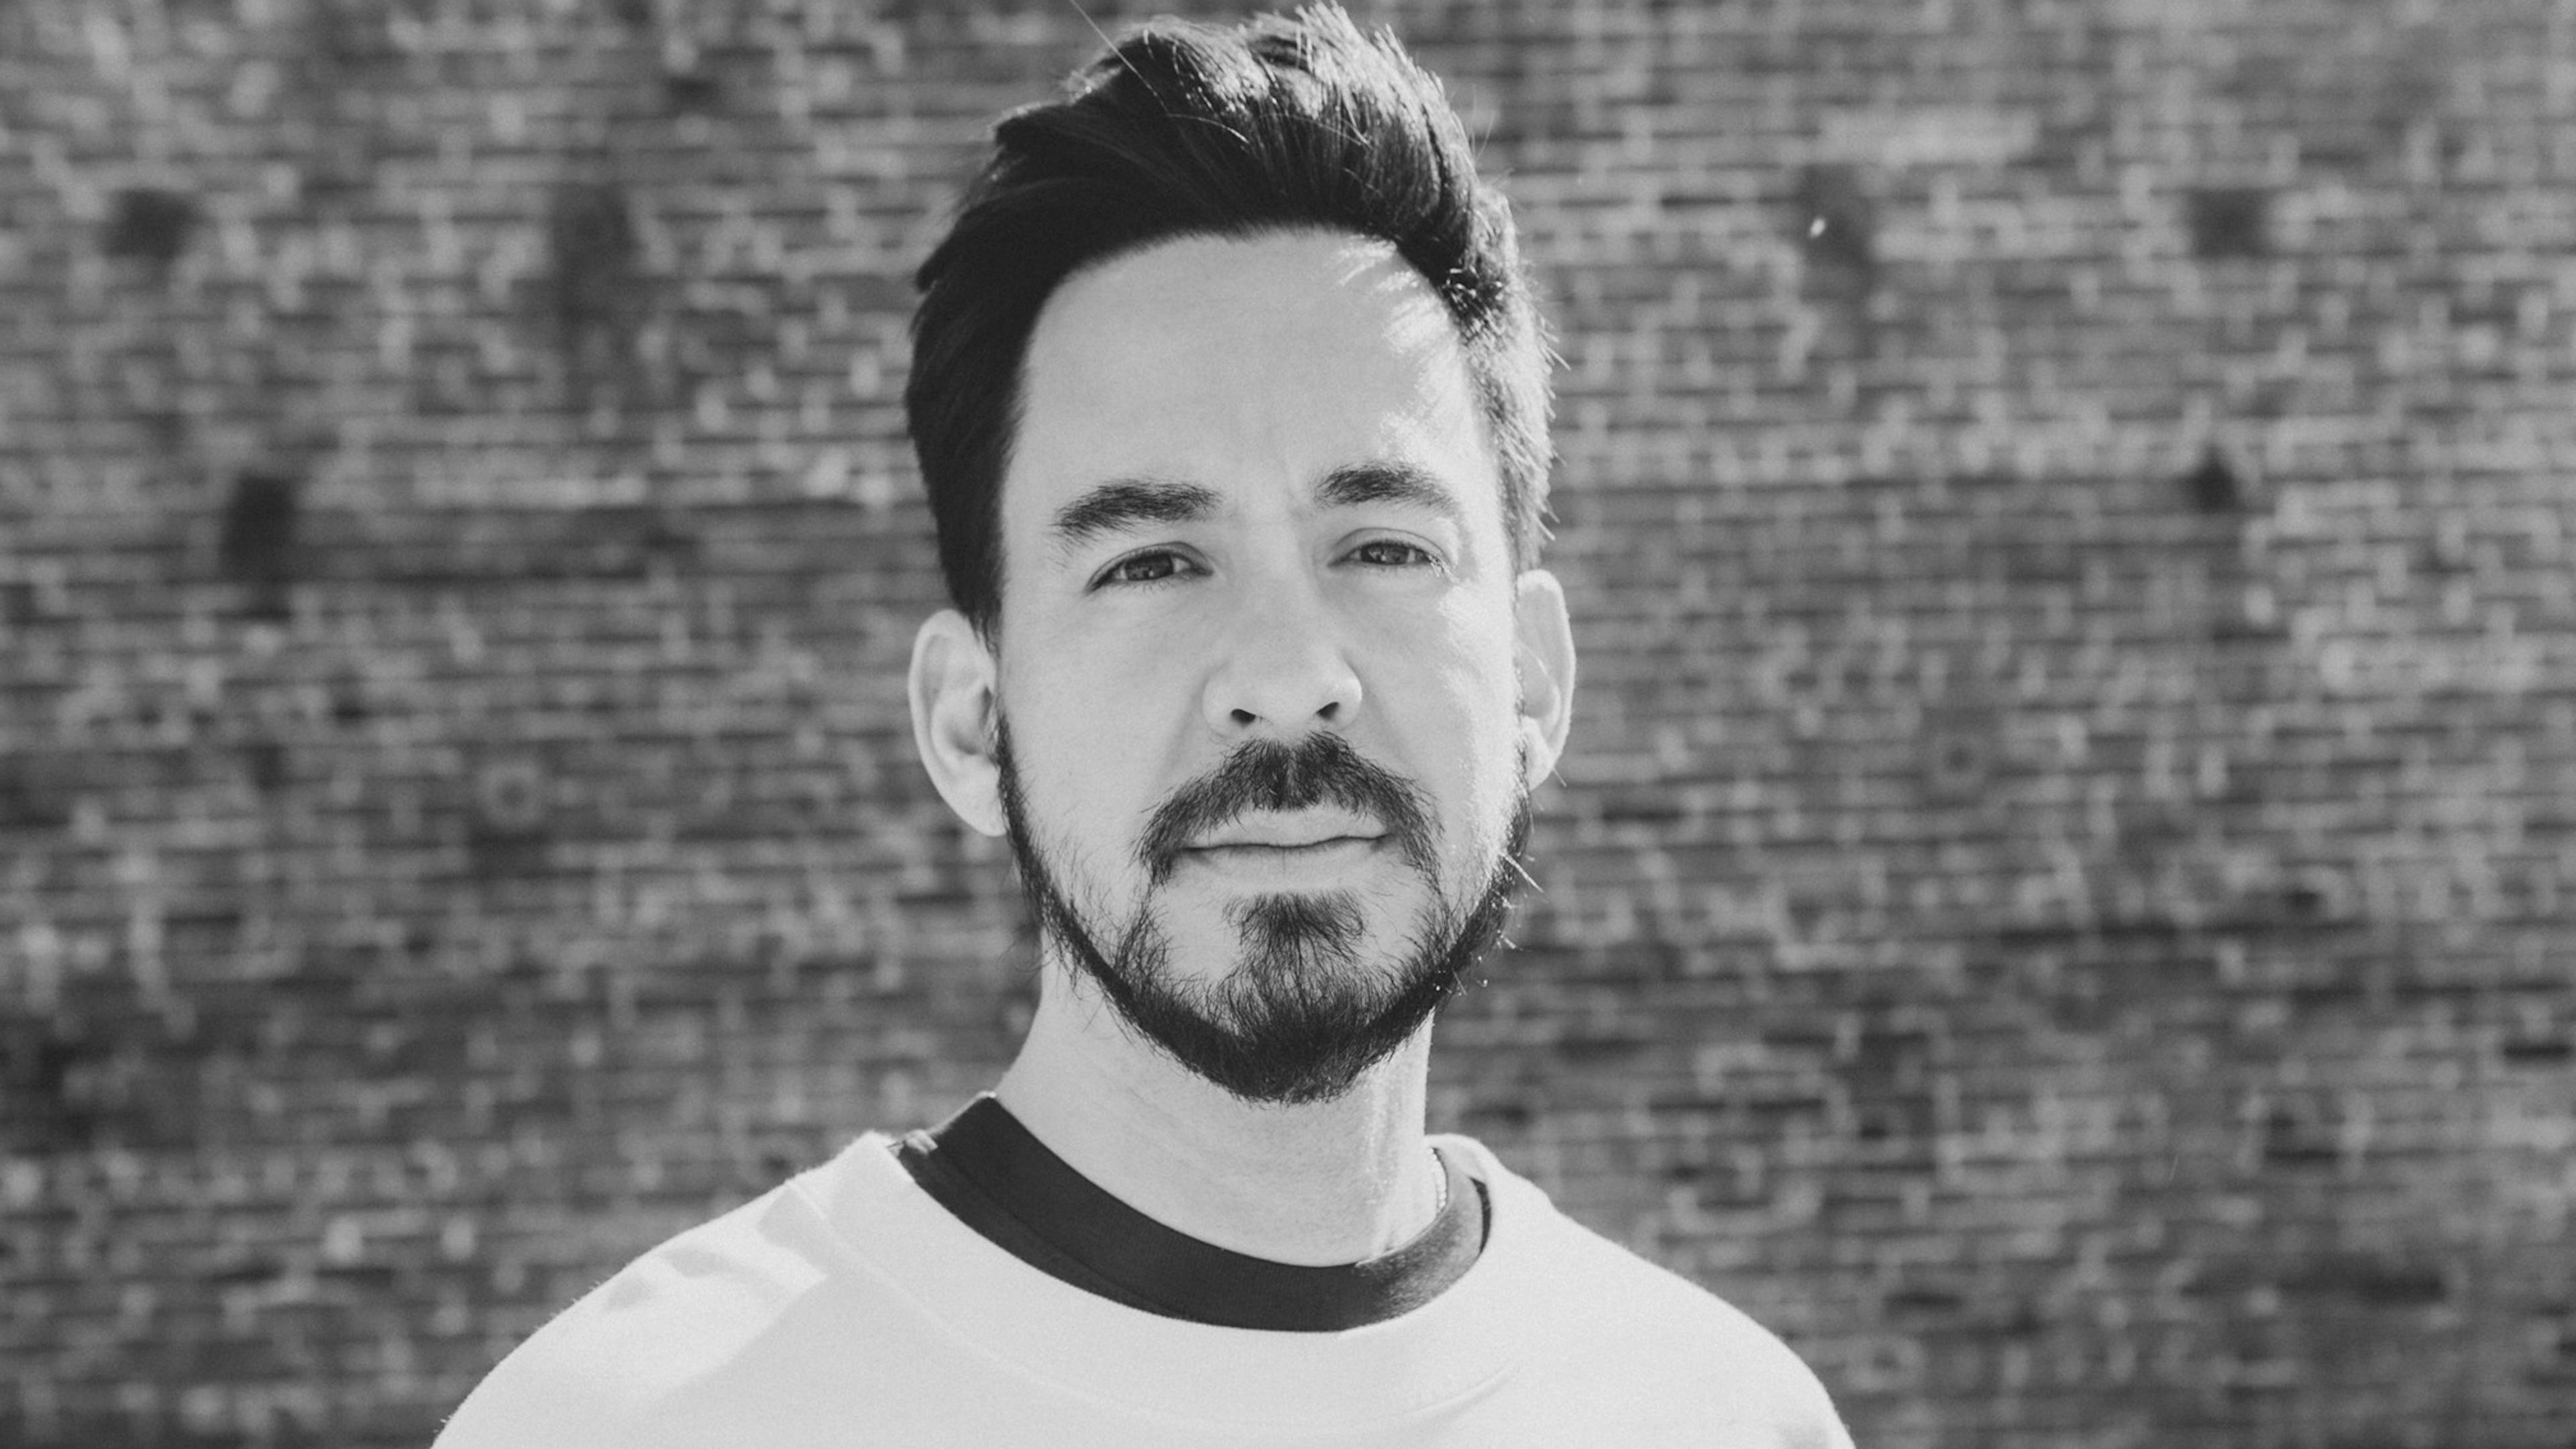 Hear the first proper teaser of Mike Shinoda’s new music